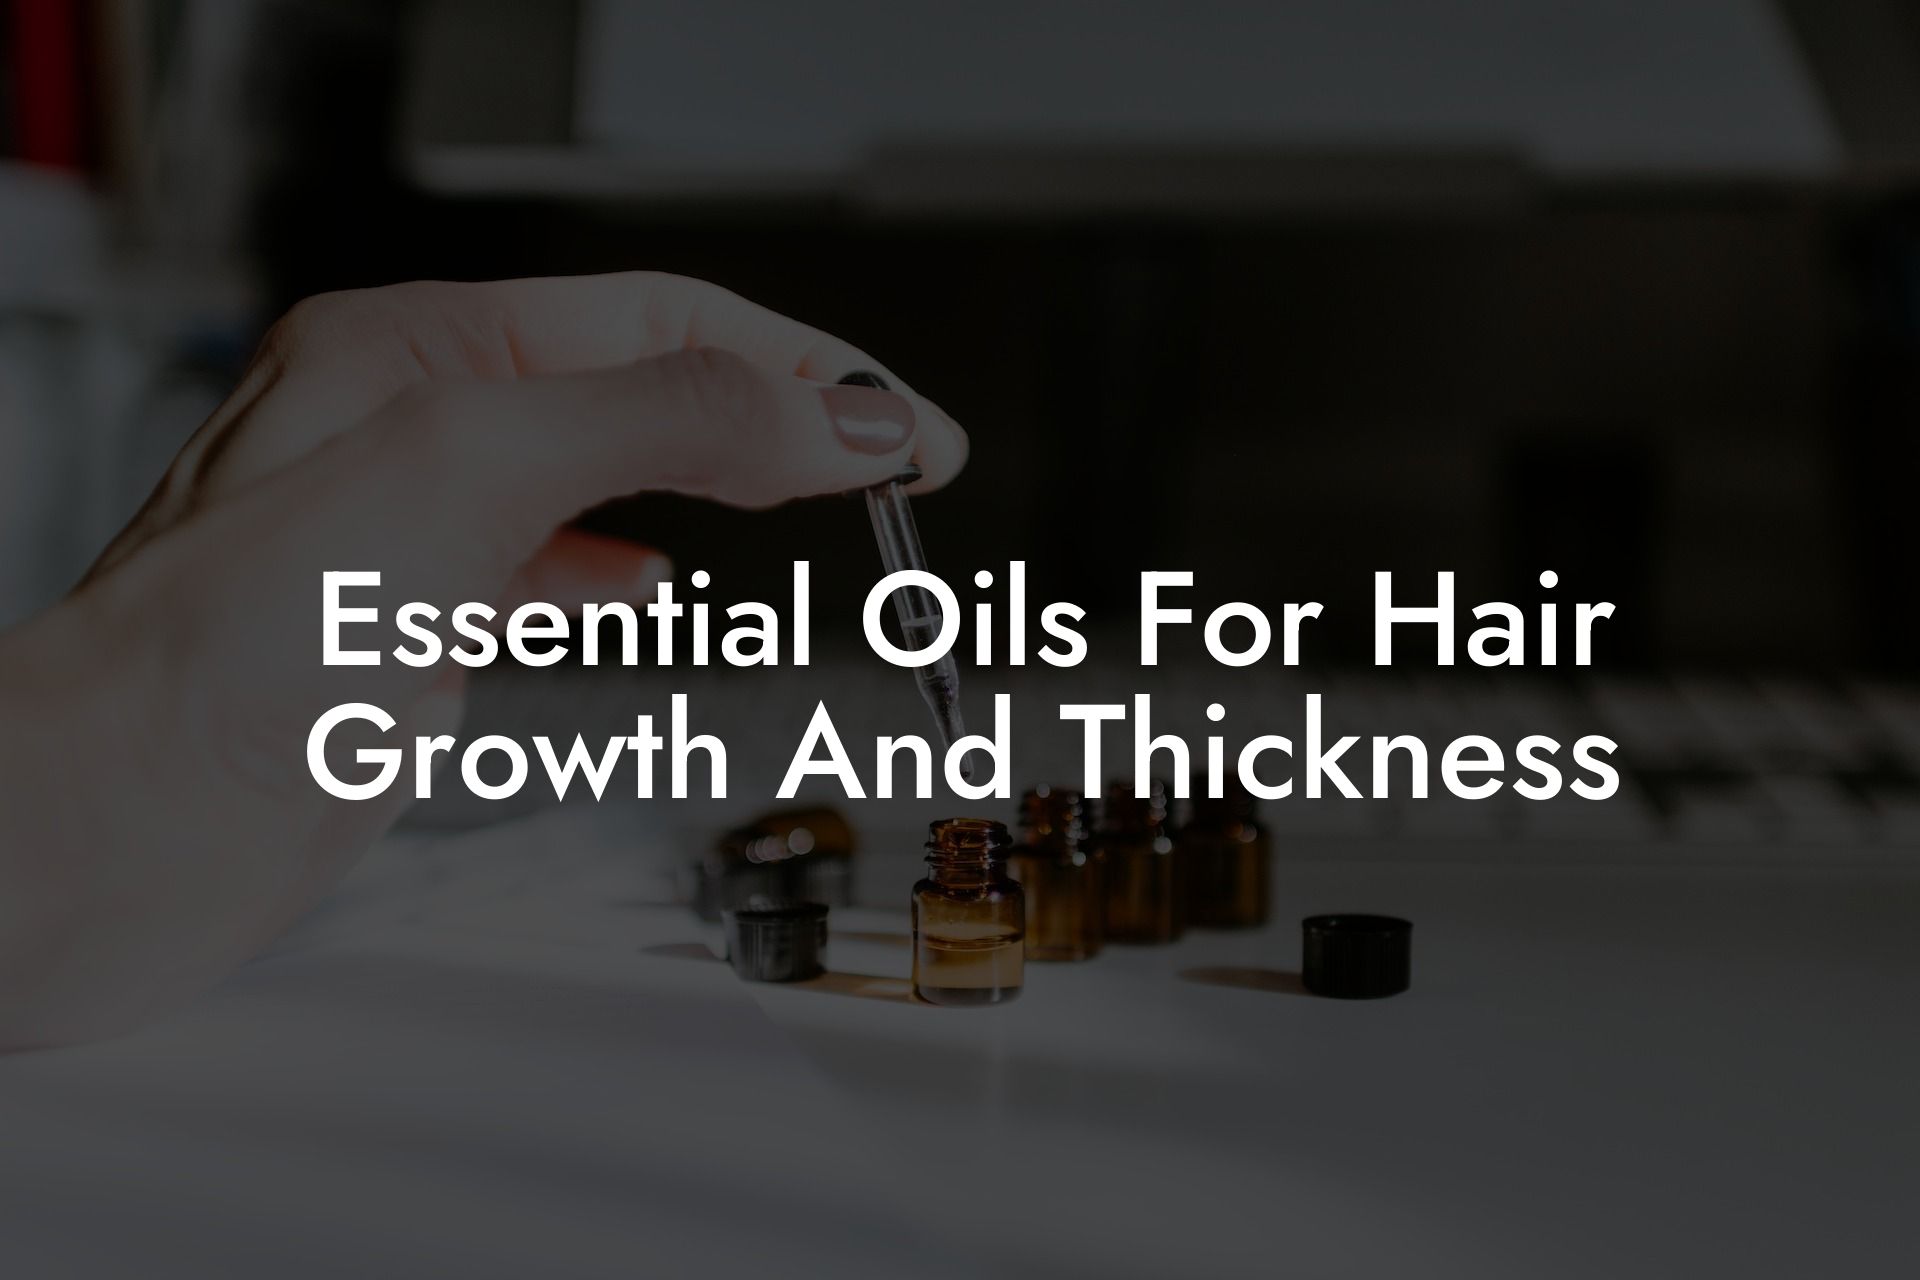 Essential Oils For Hair Growth And Thickness